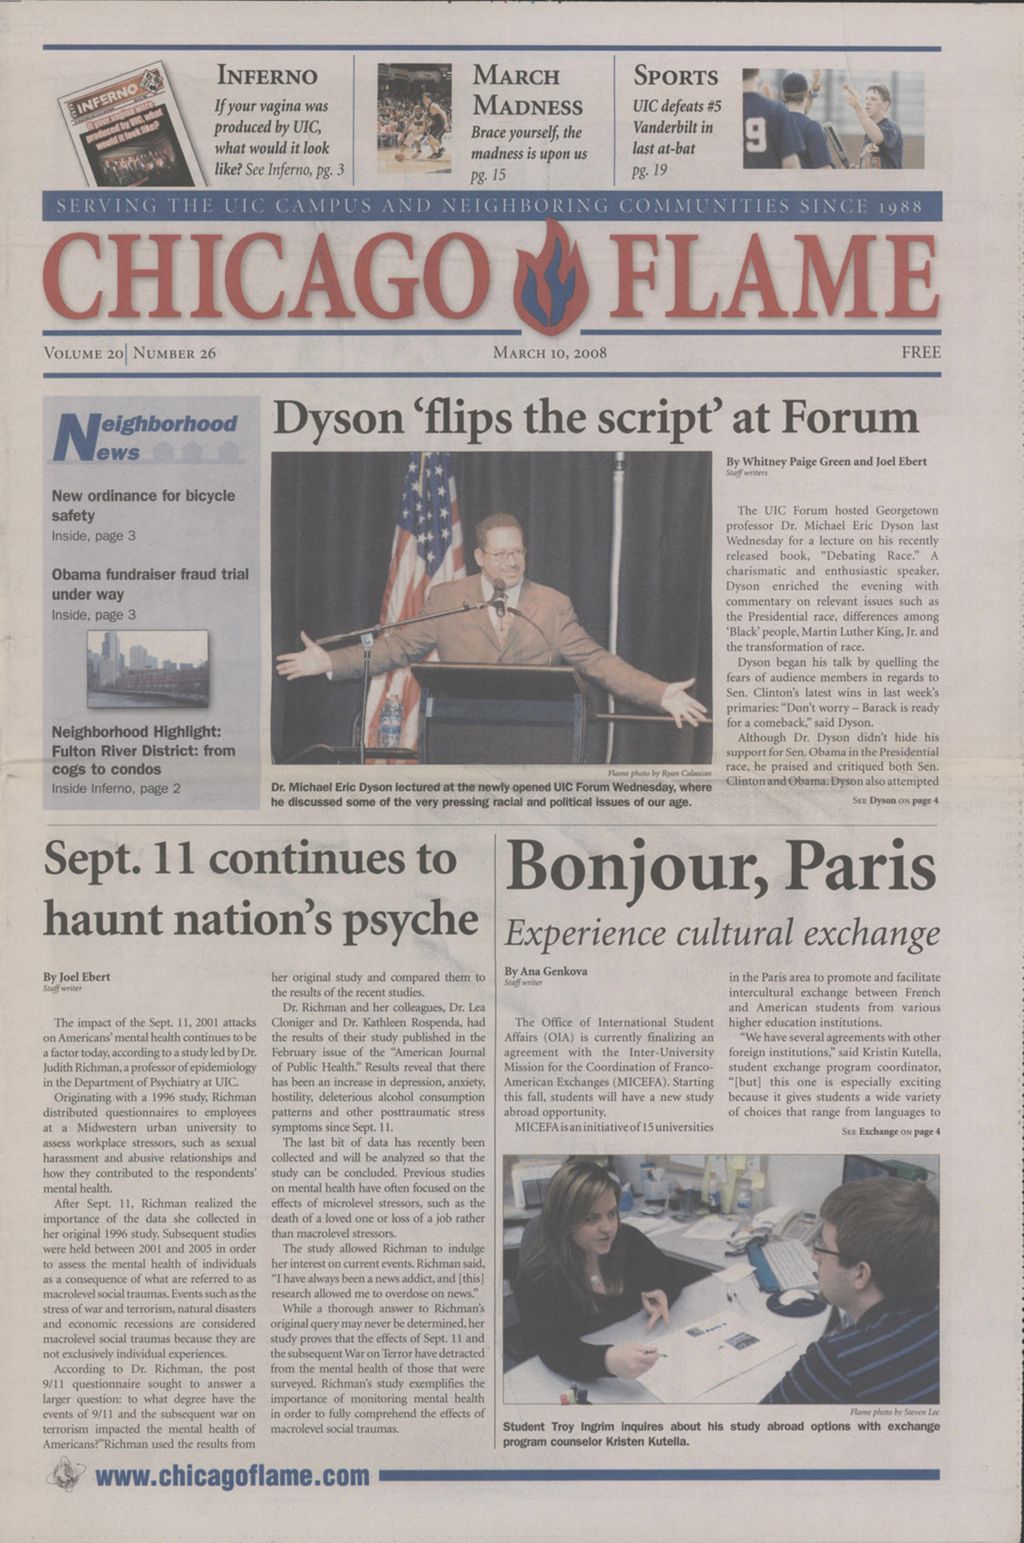 Miniature of Chicago Flame (March 10, 2008)